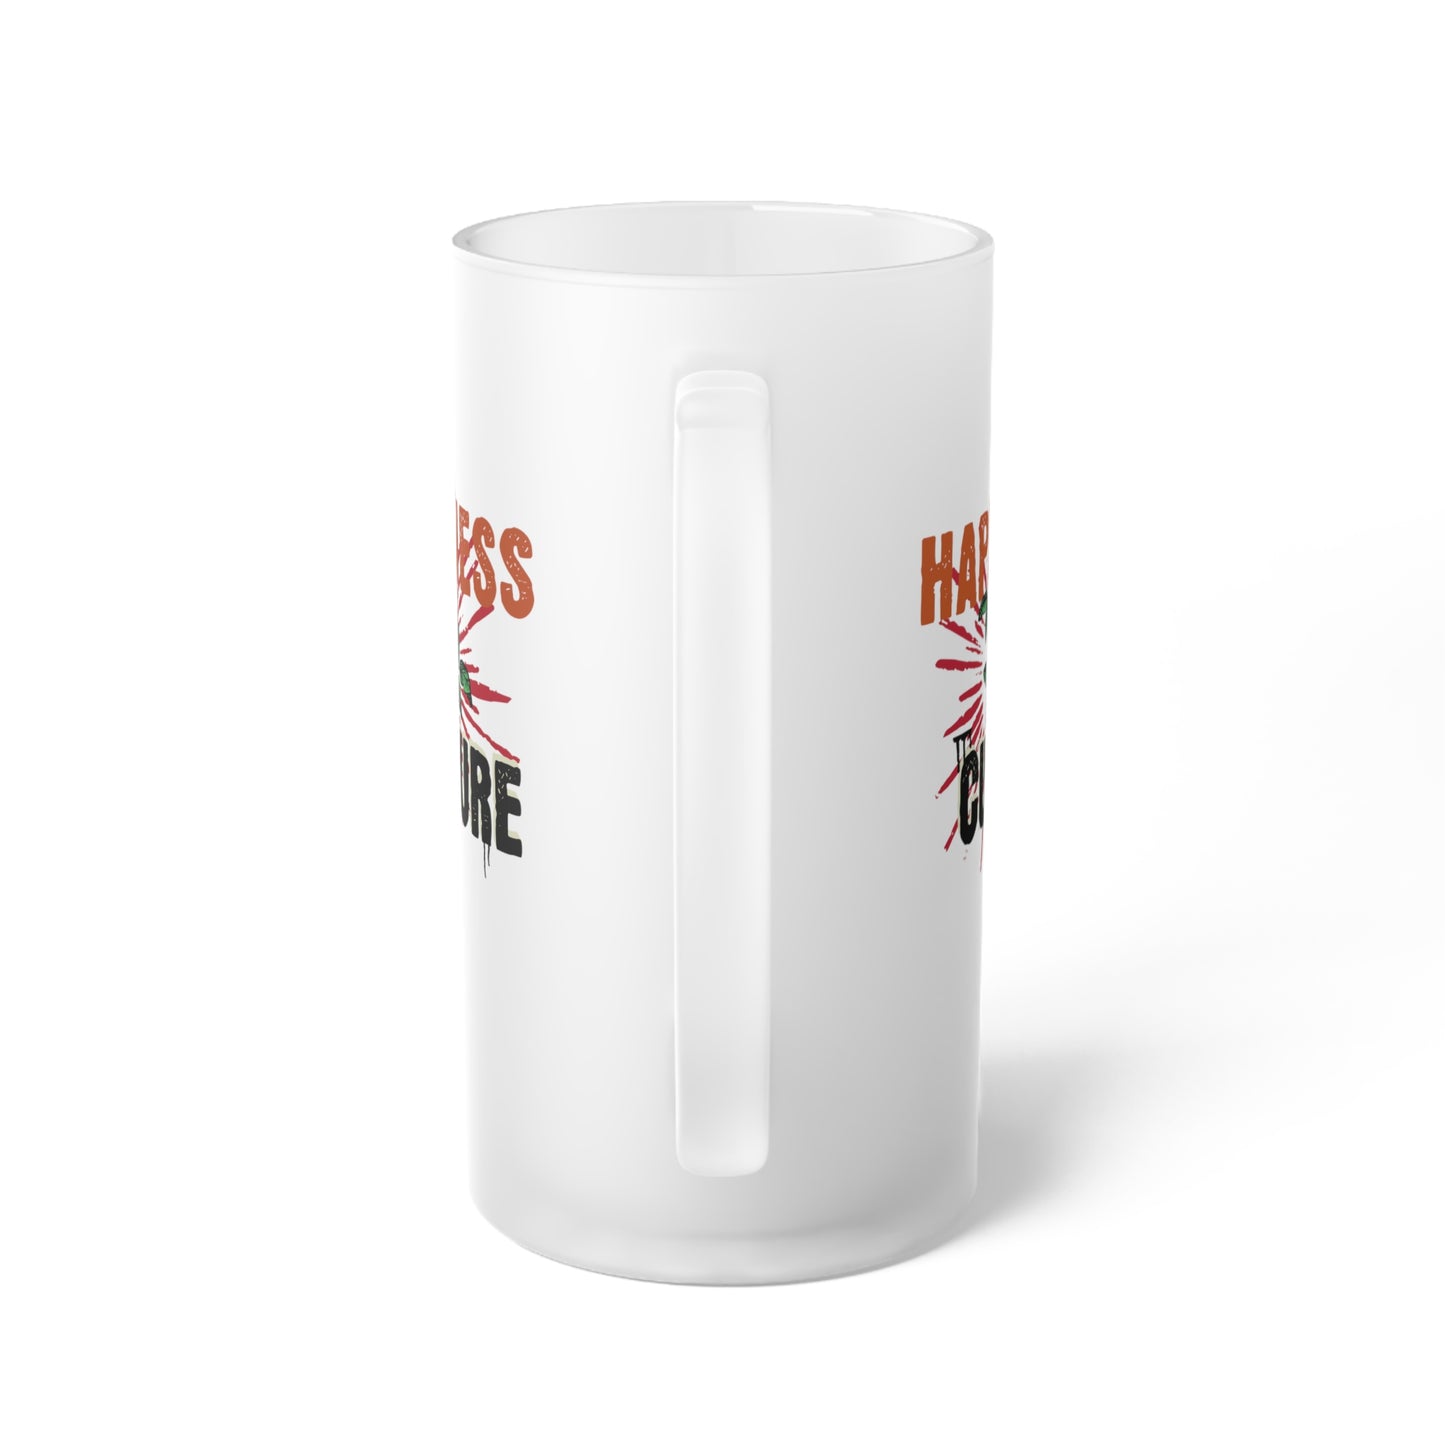 Happy-Hour Frosted Glass Beer Mug, Happiness Culture design